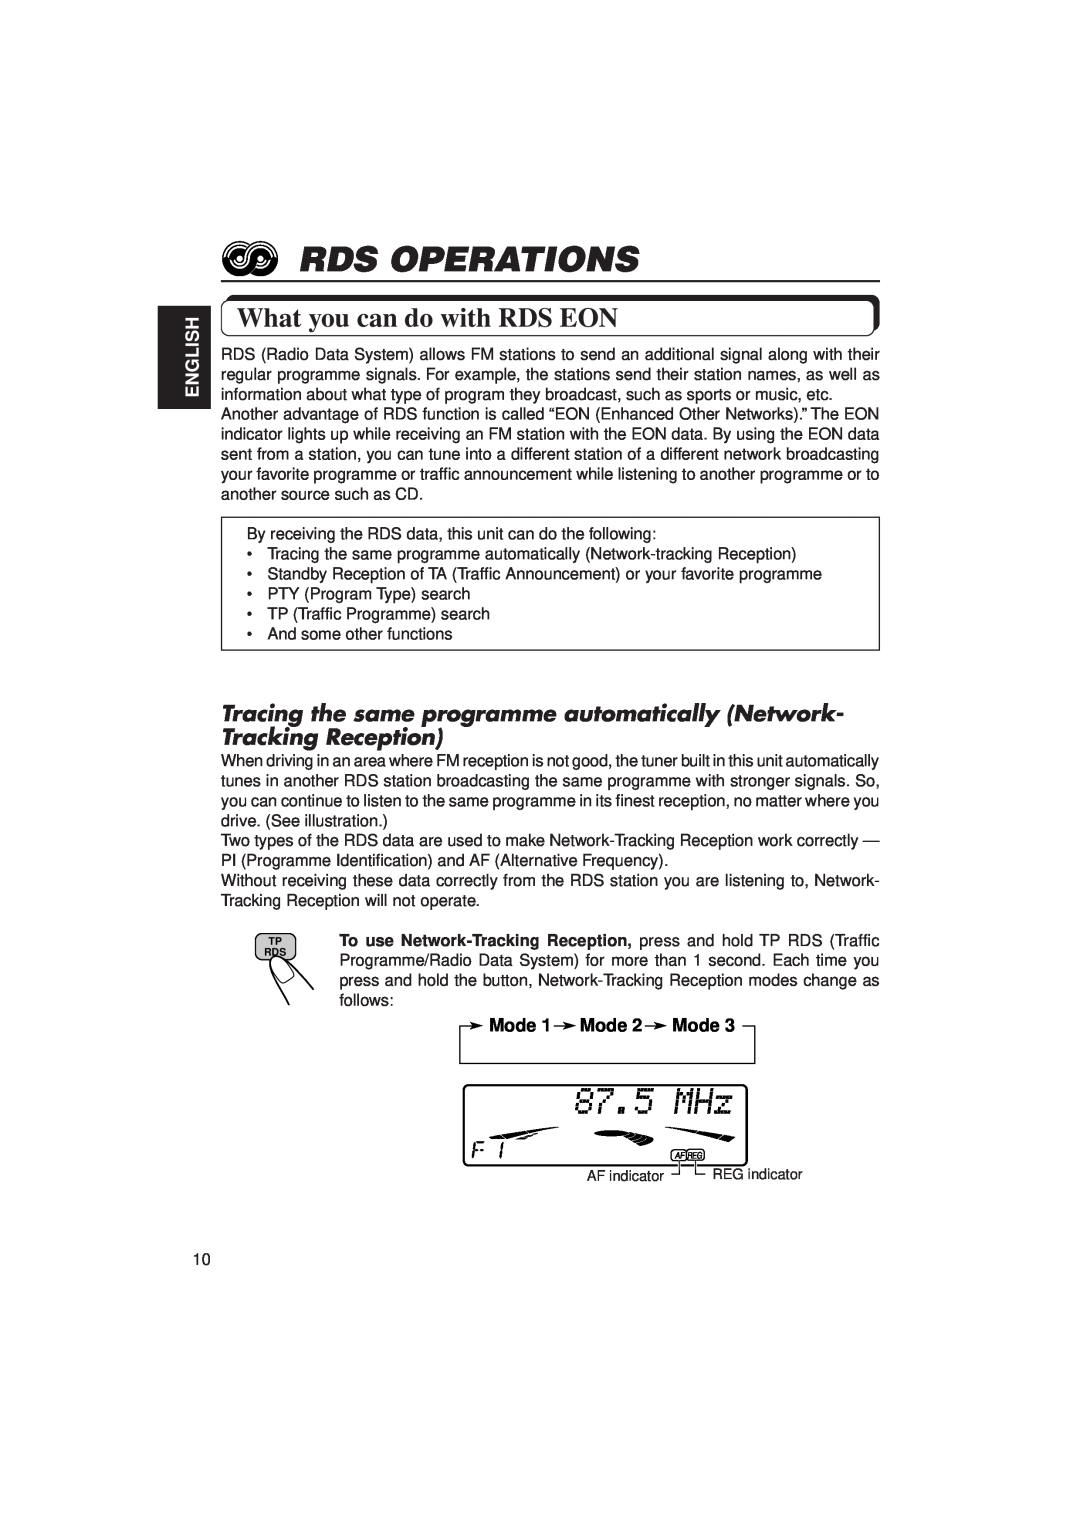 JVC KD-MX2900R manual Rds Operations, What you can do with RDS EON, English, Mode 1 Mode 2 Mode 